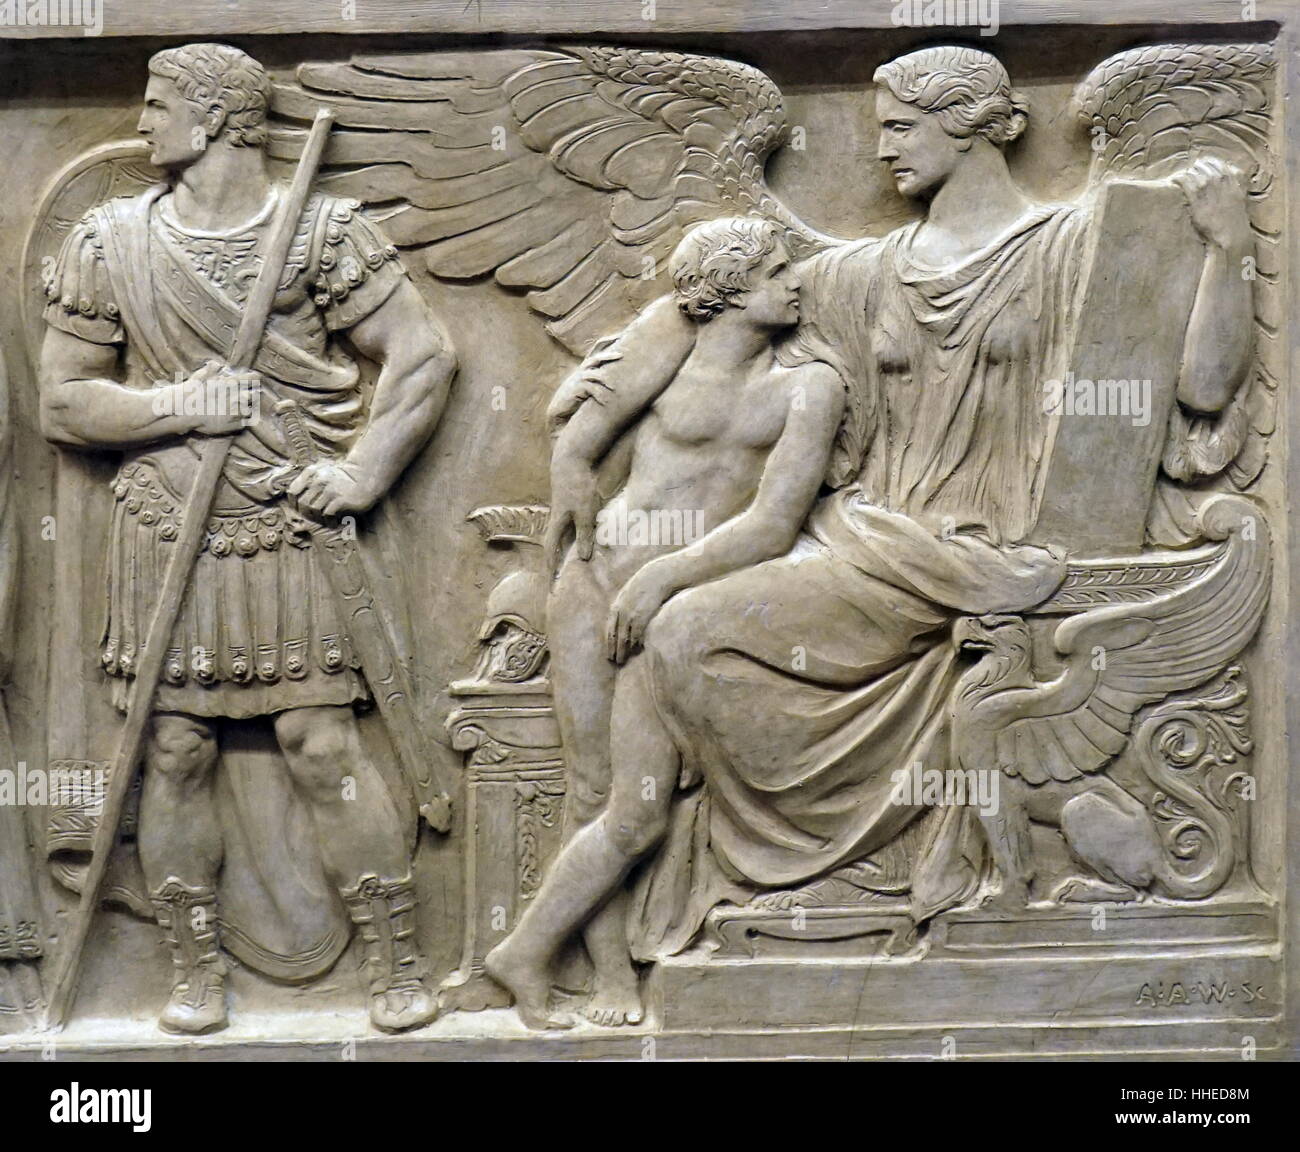 Relief depicting the figure of Octavian and the muse of History. Octavian known as Augustus (63 BC – 14 AD) was the founder of the Roman Empire and its first Emperor, ruling from 27 BC until his death. US Supreme Court, Washington DC. USA. Stock Photo